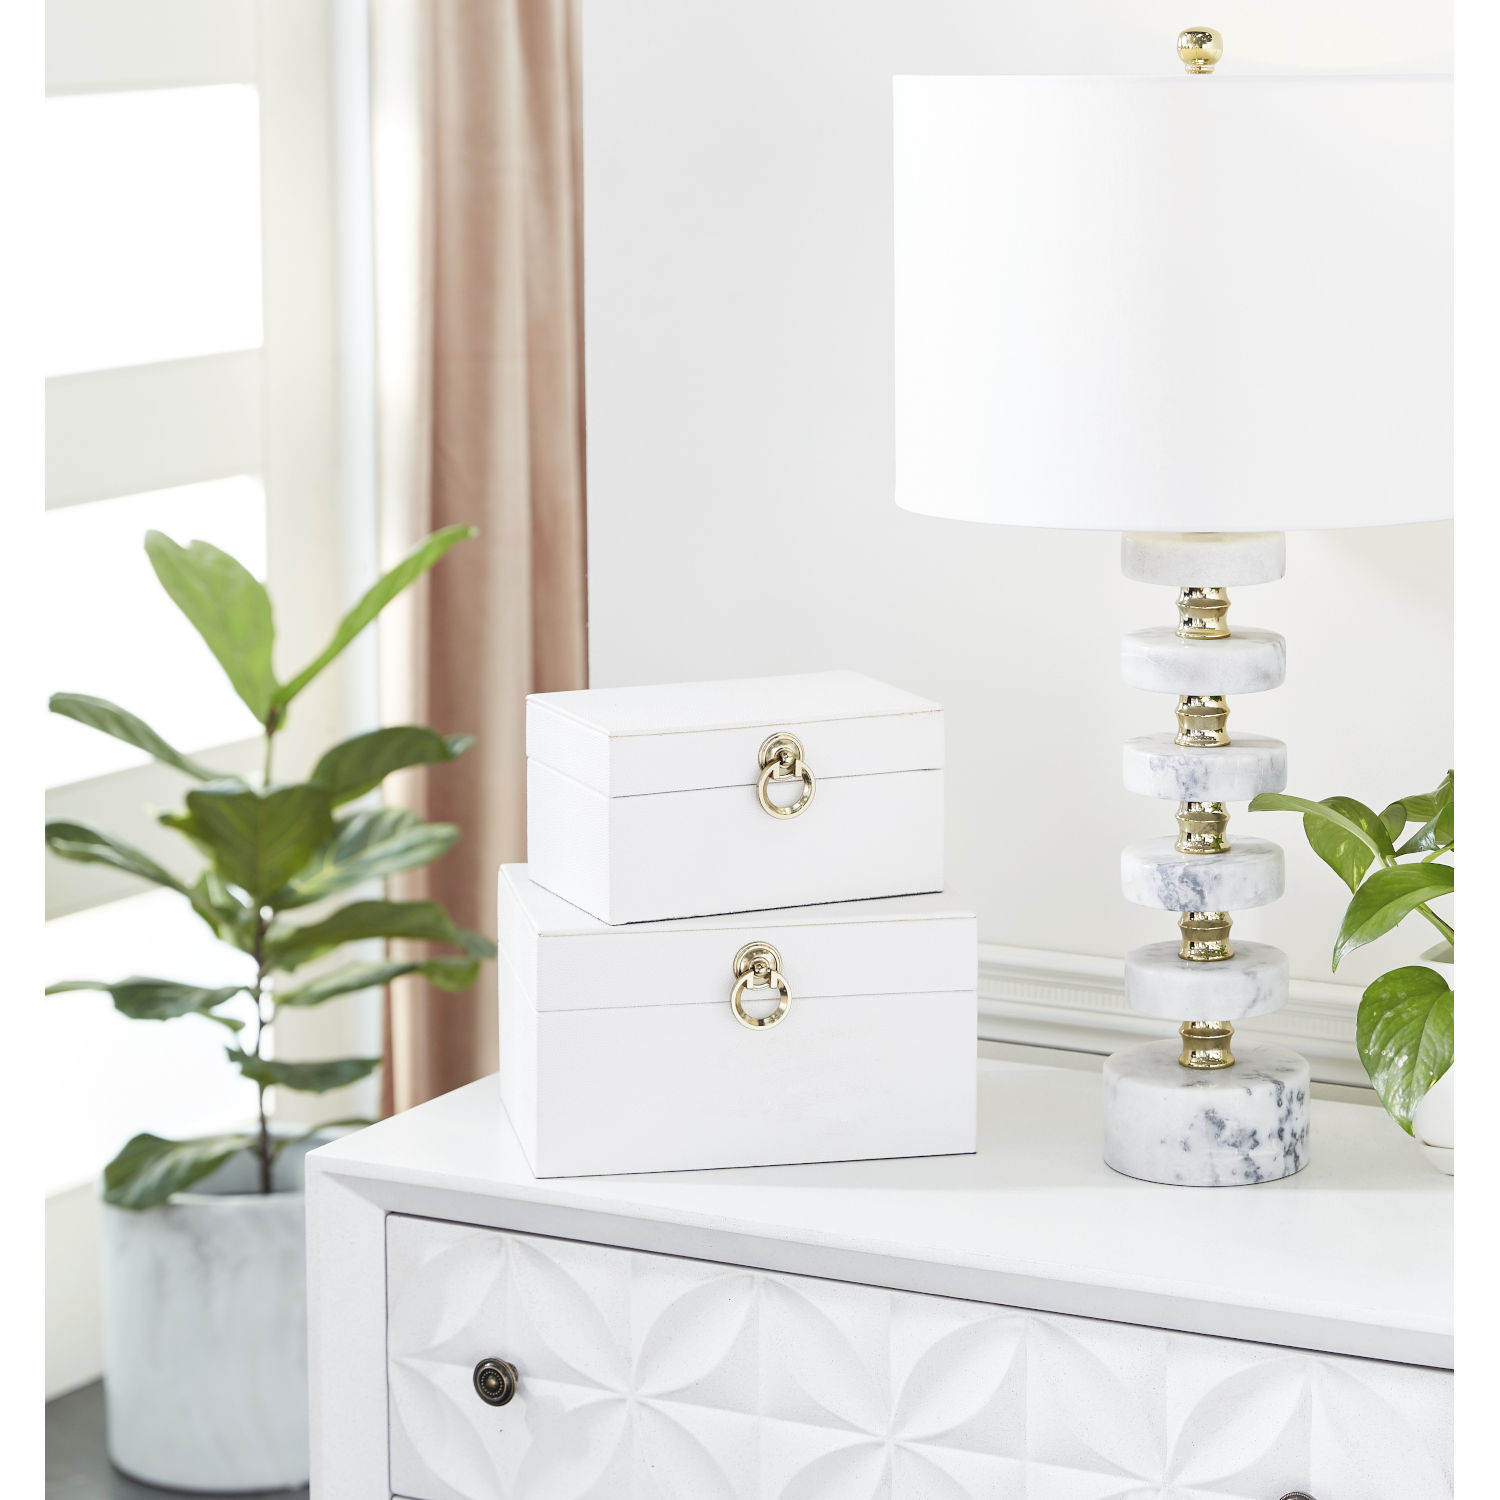 Decorative Boxes Category